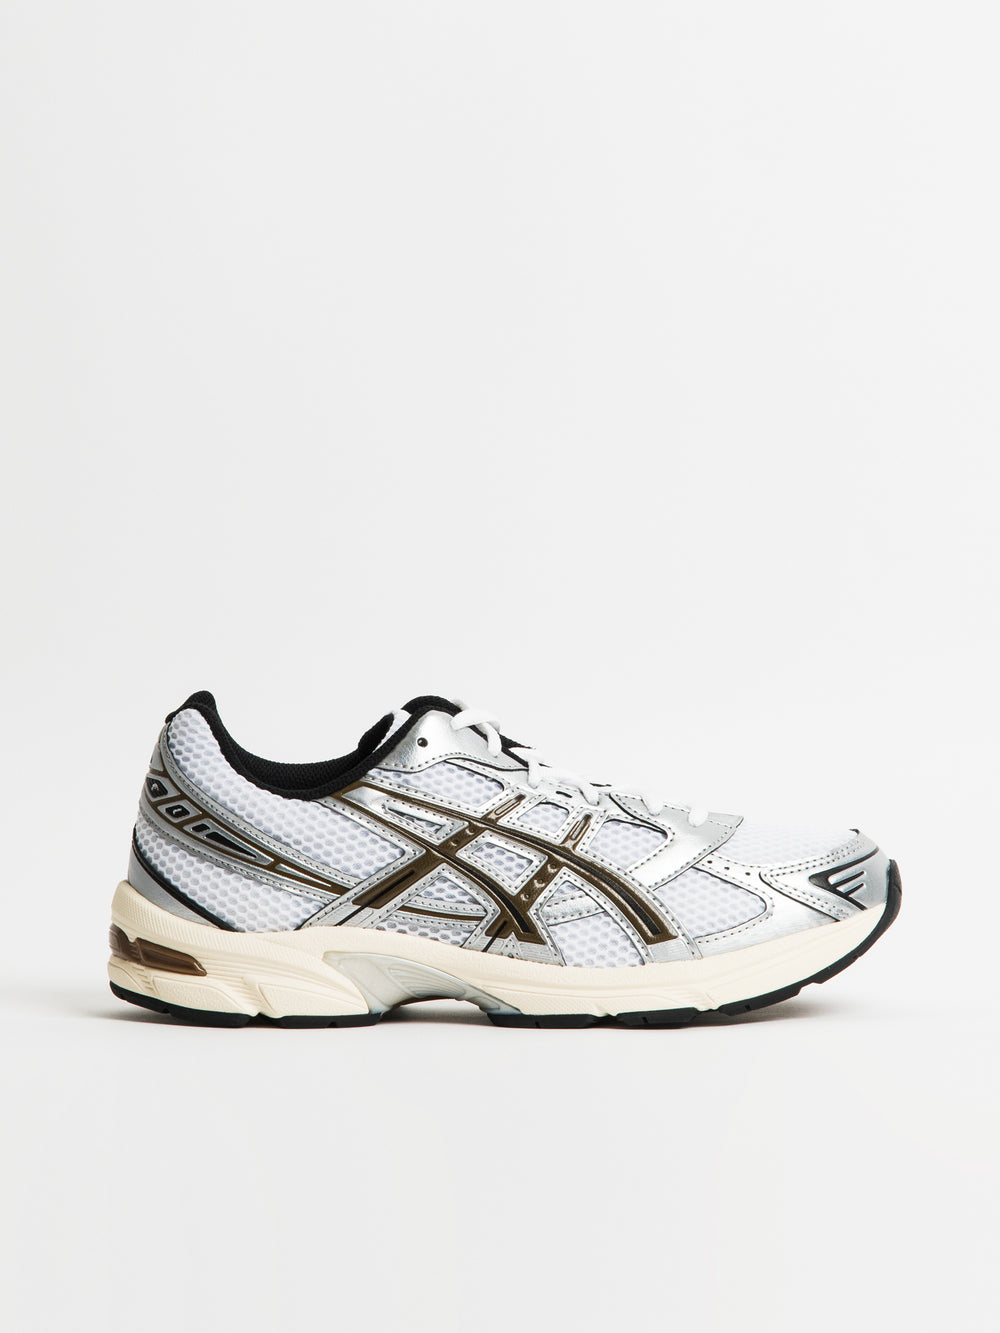 Share 228+ asics mens casual sneakers best